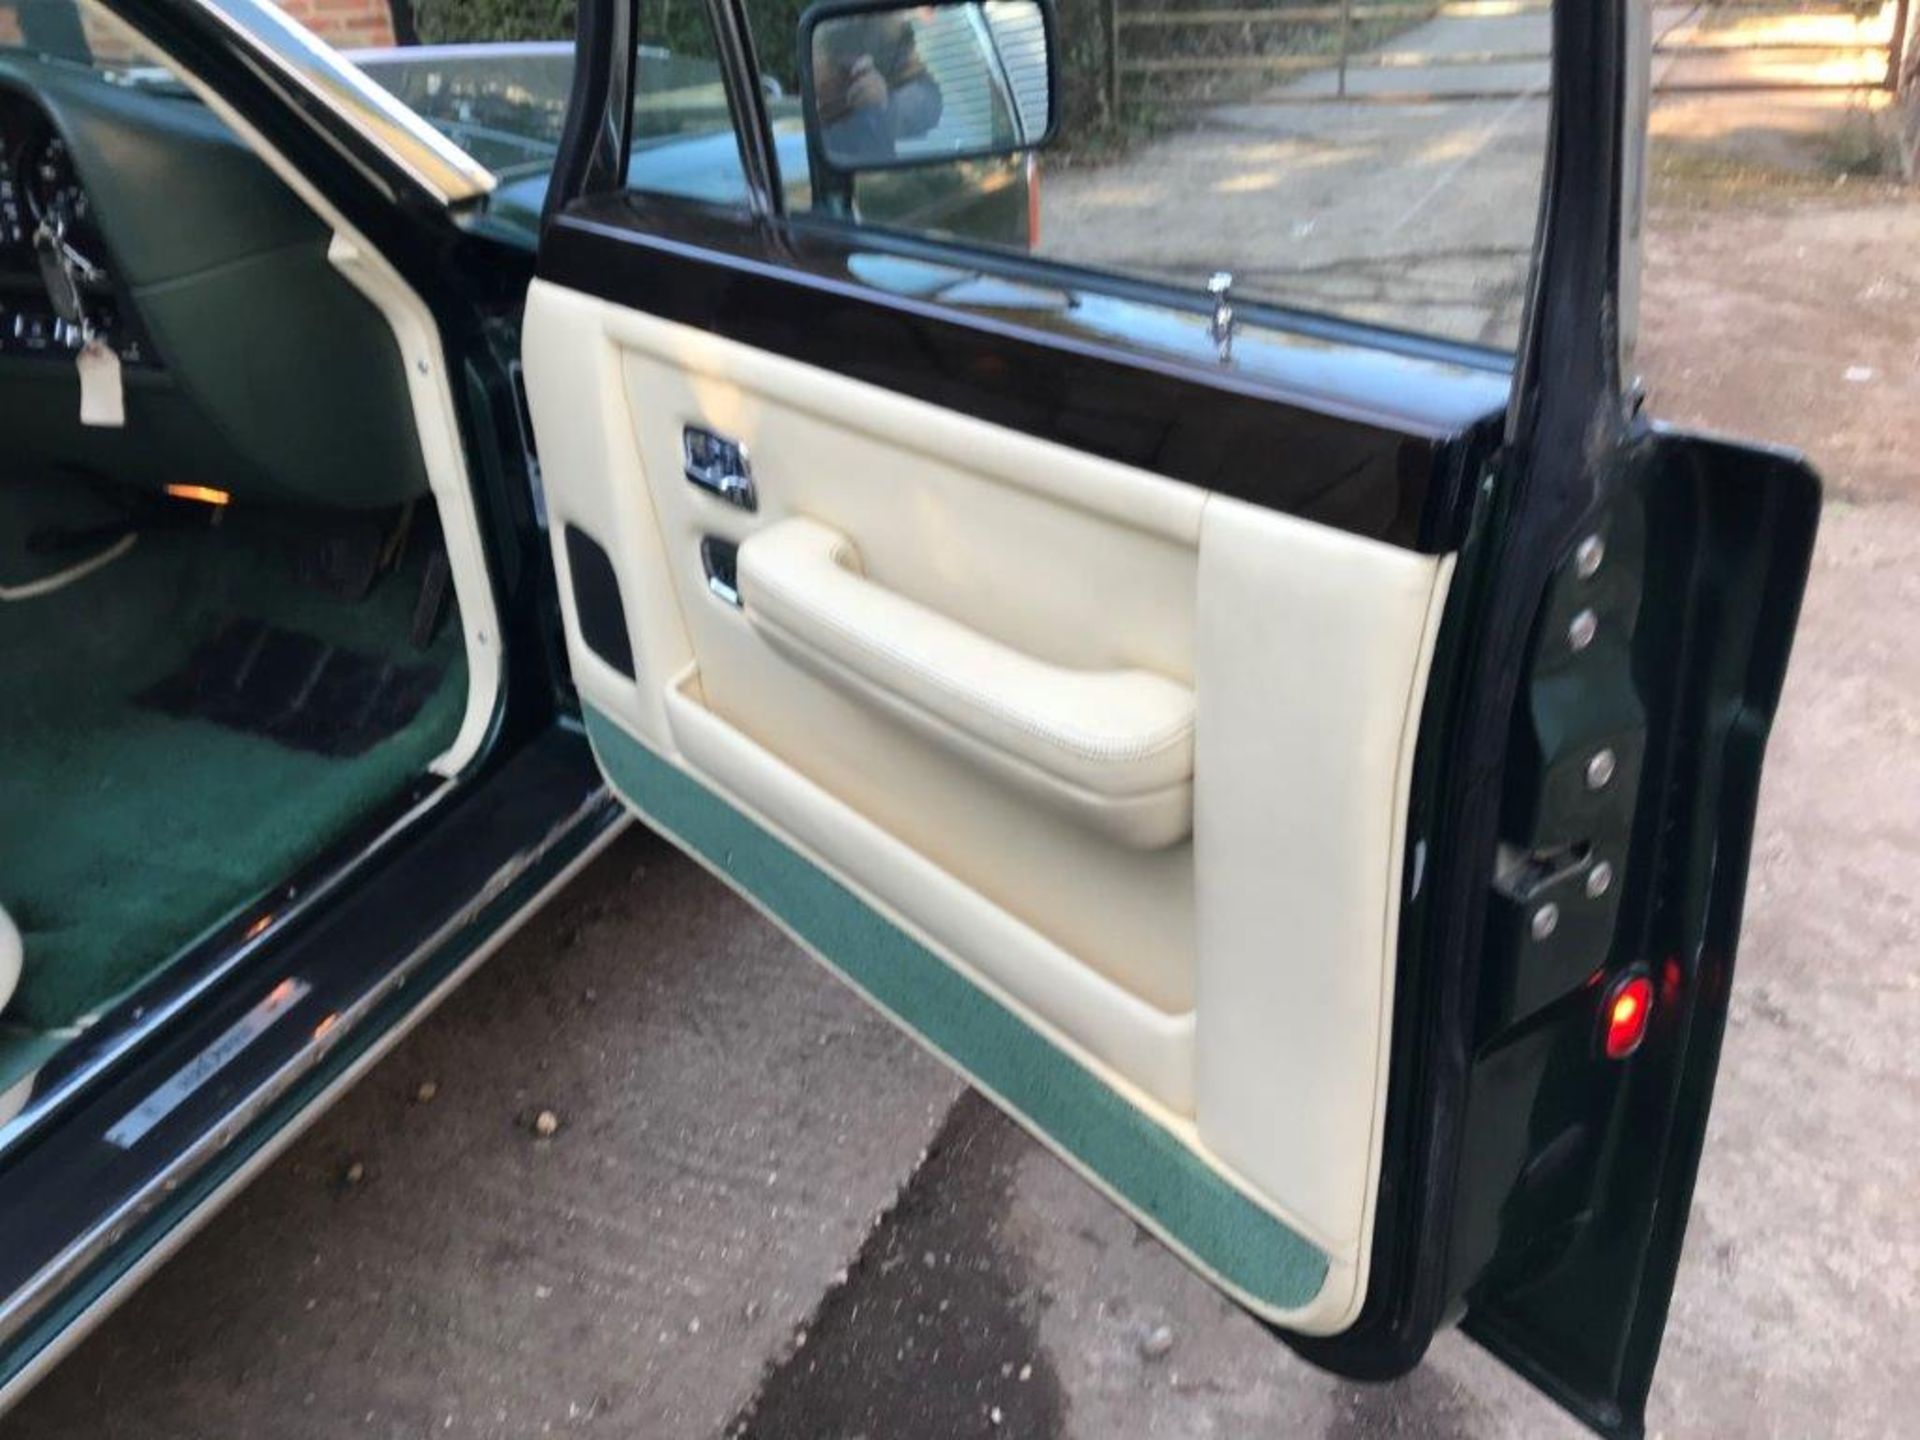 1989 BENTLEY 56k MILES - PRIVATE PLATE "20 CO" 2 PREVIOUS OWNERS FROM NEW - NEW MOT TO MARCH 2019 - Image 11 of 30